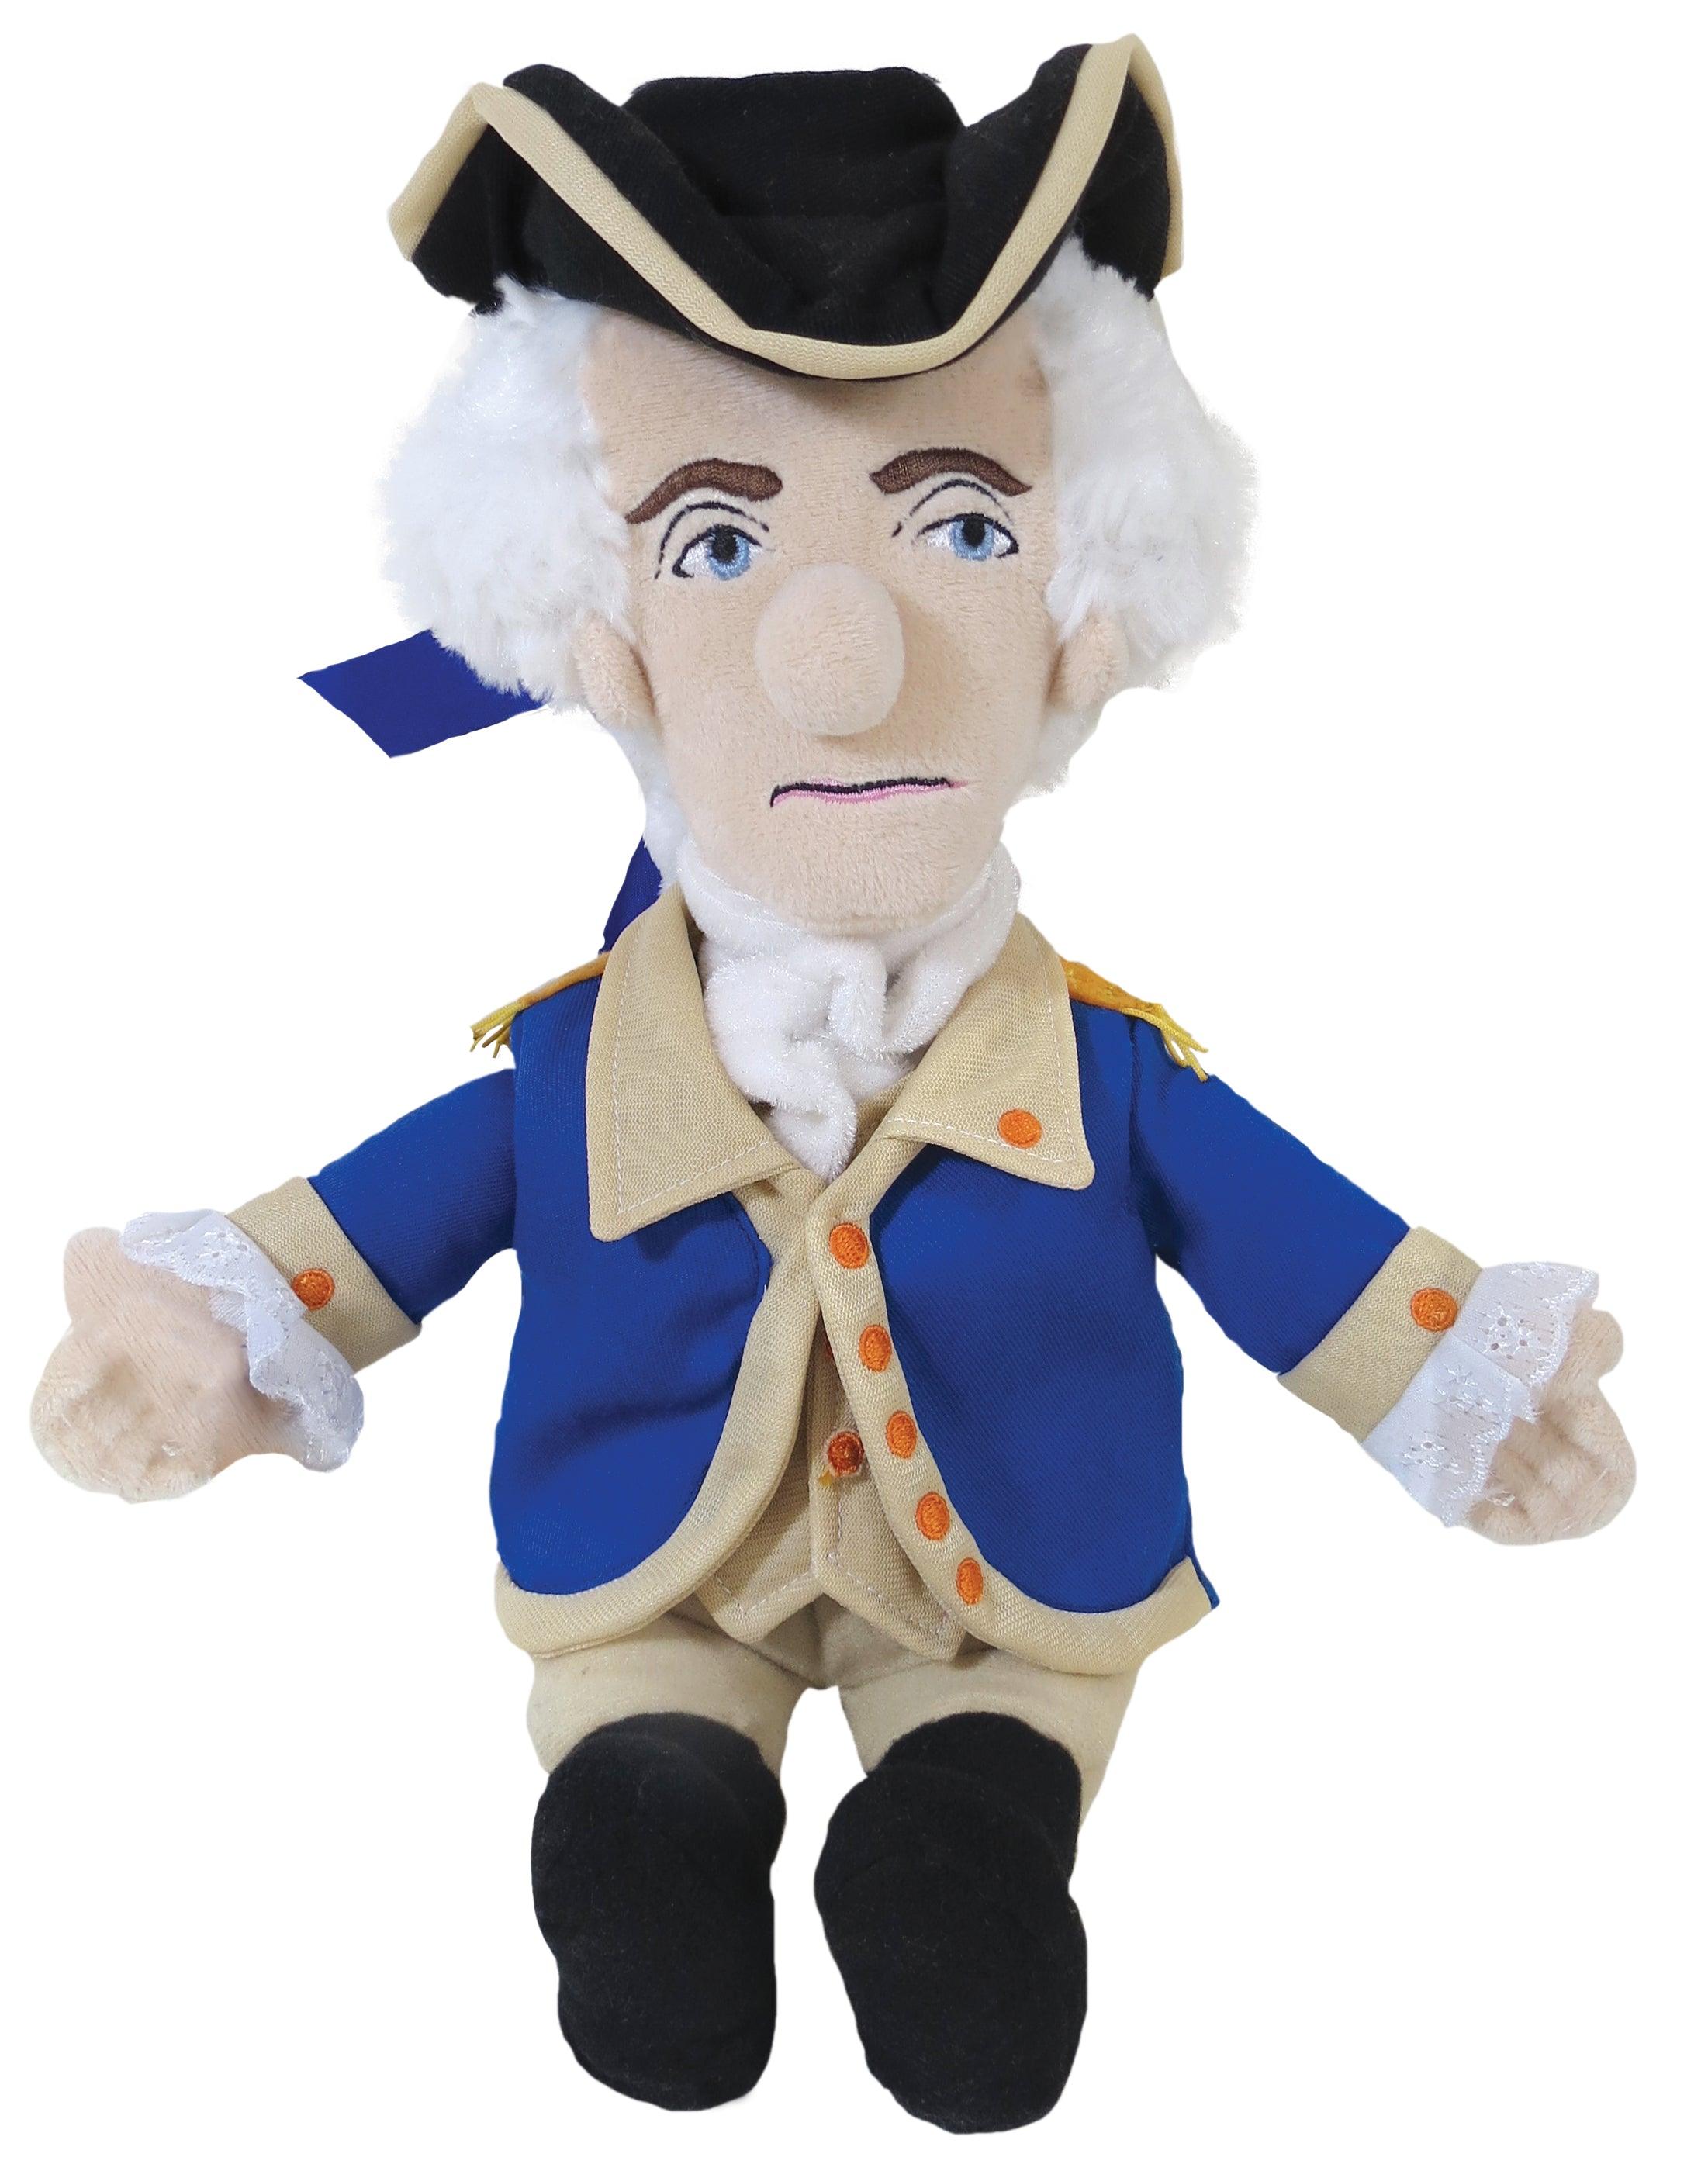 George Washington Plush Doll  Smart and Funny Gifts by UPG – The  Unemployed Philosophers Guild